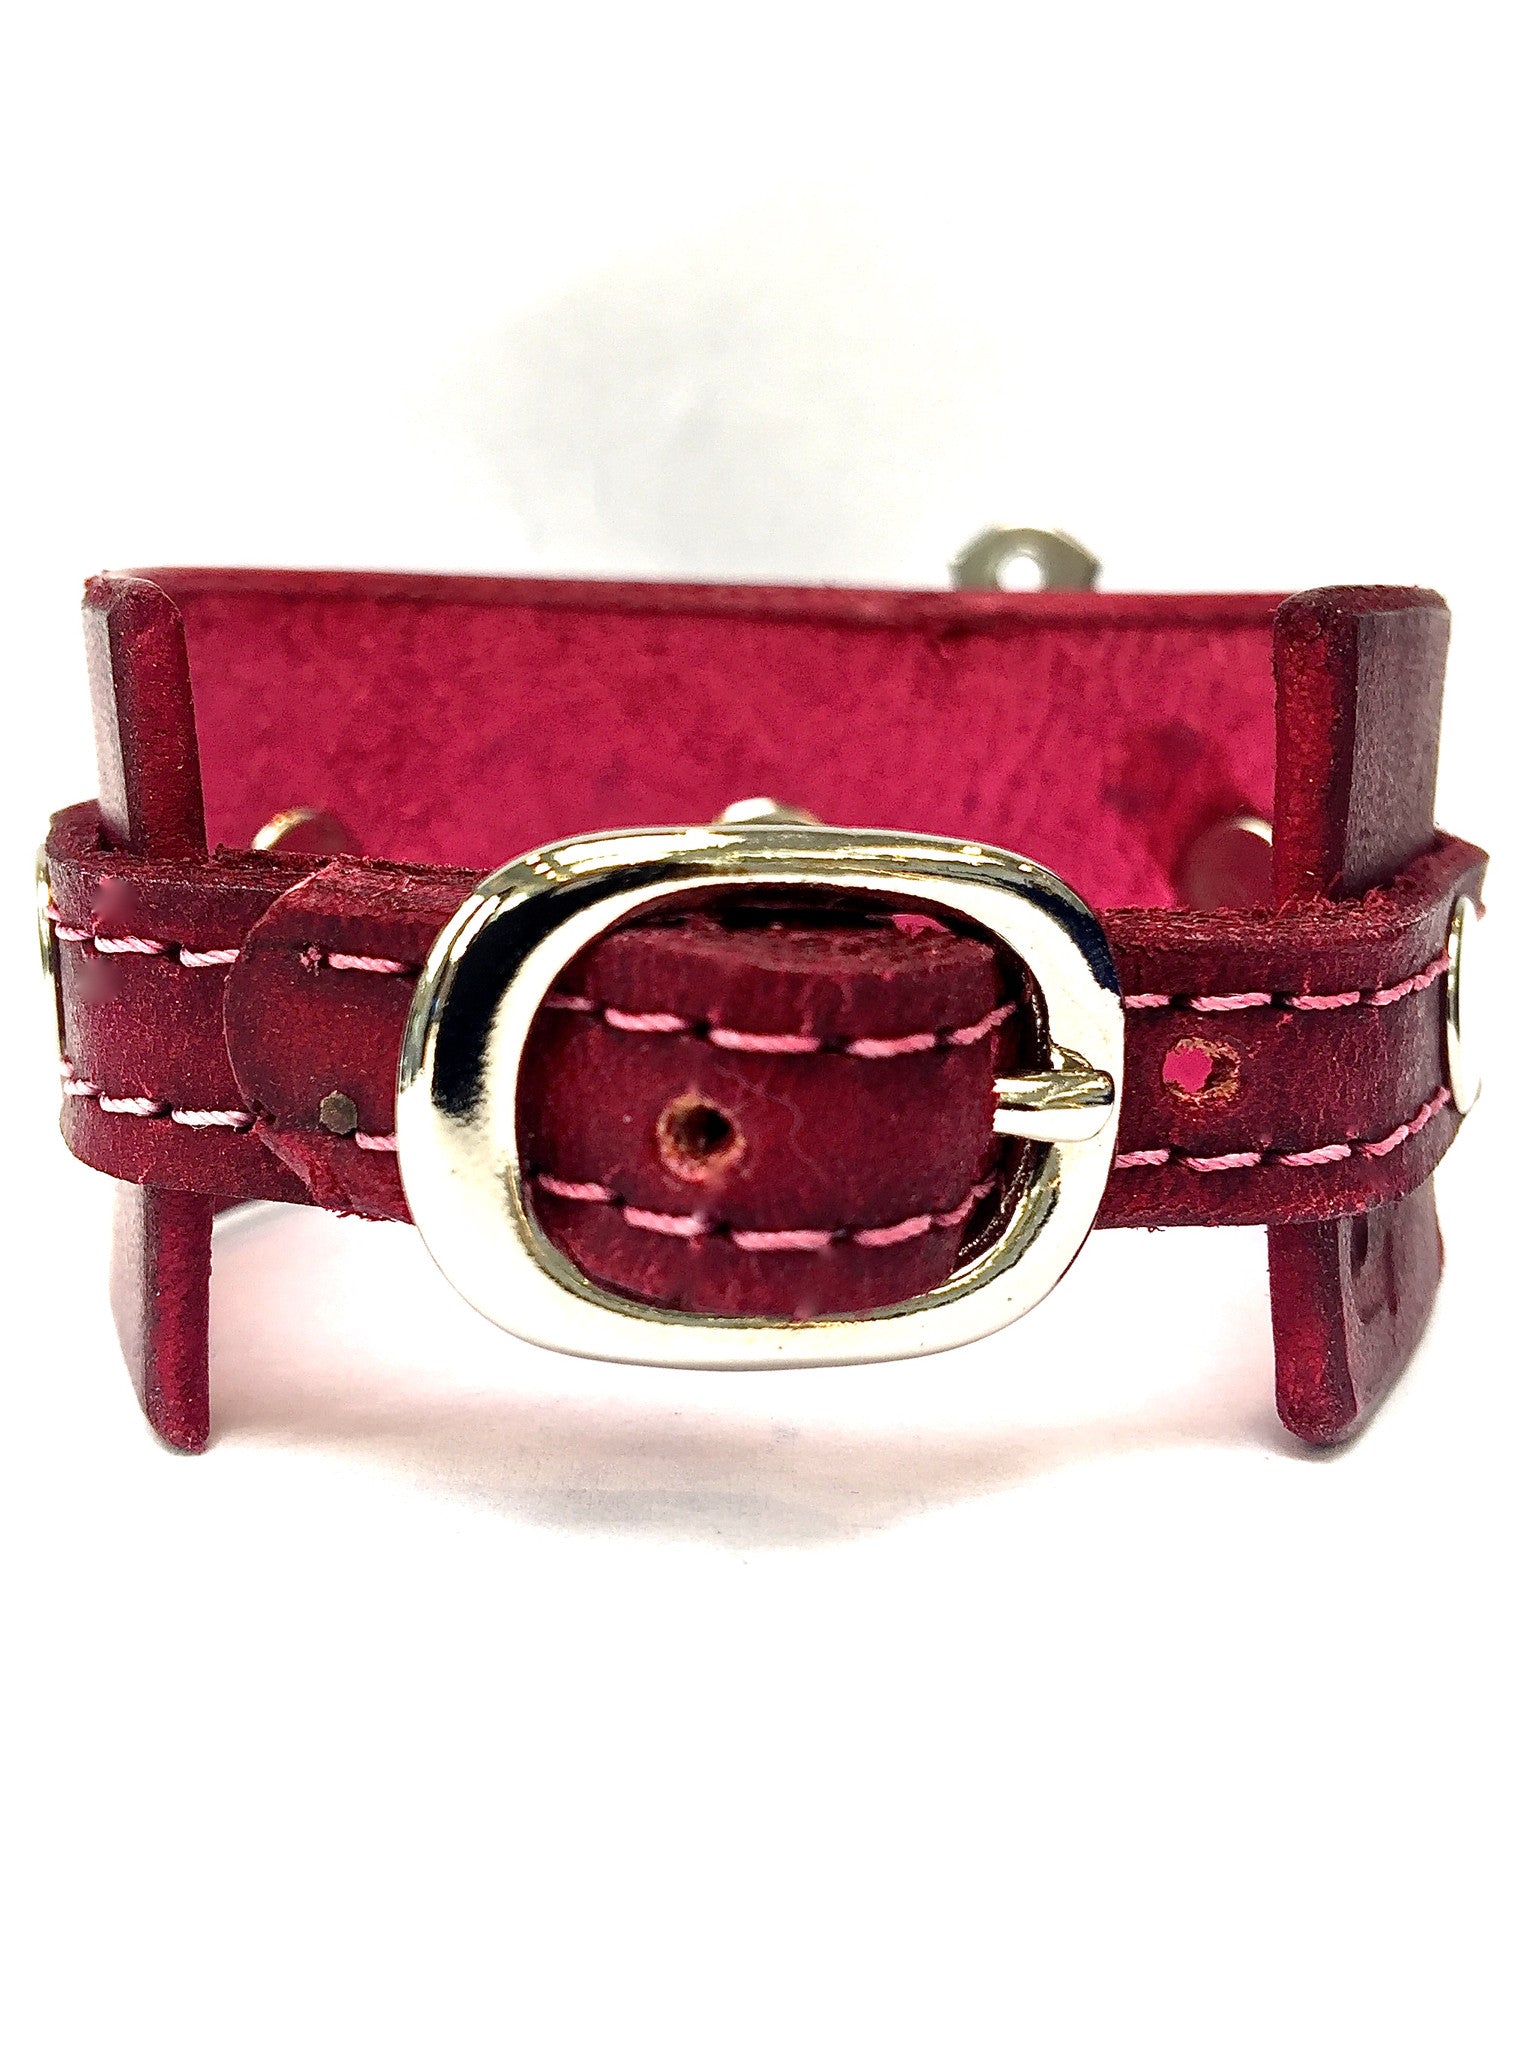 leather cuff with anchor shackle Raspberry by nyet jewelry.